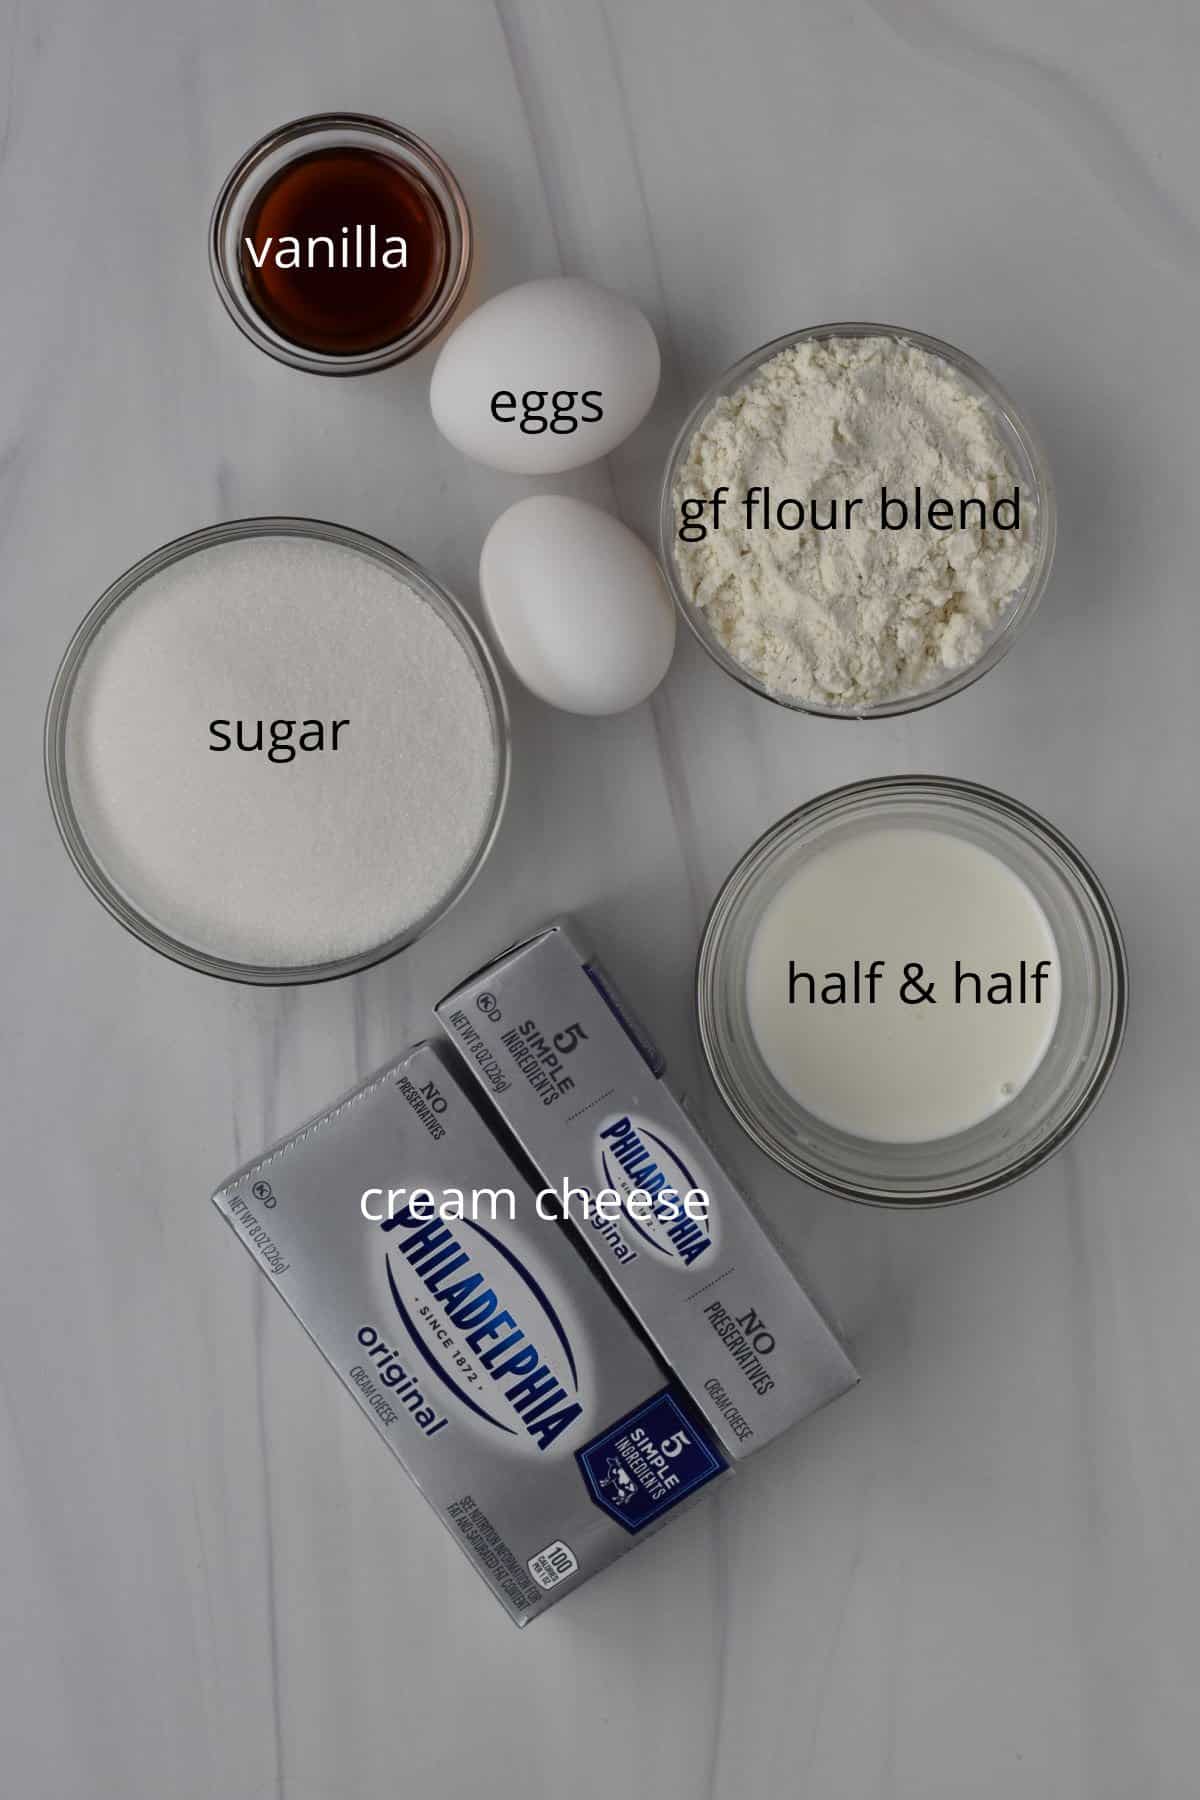 Ingredients, with labels, for cream cheese filling.